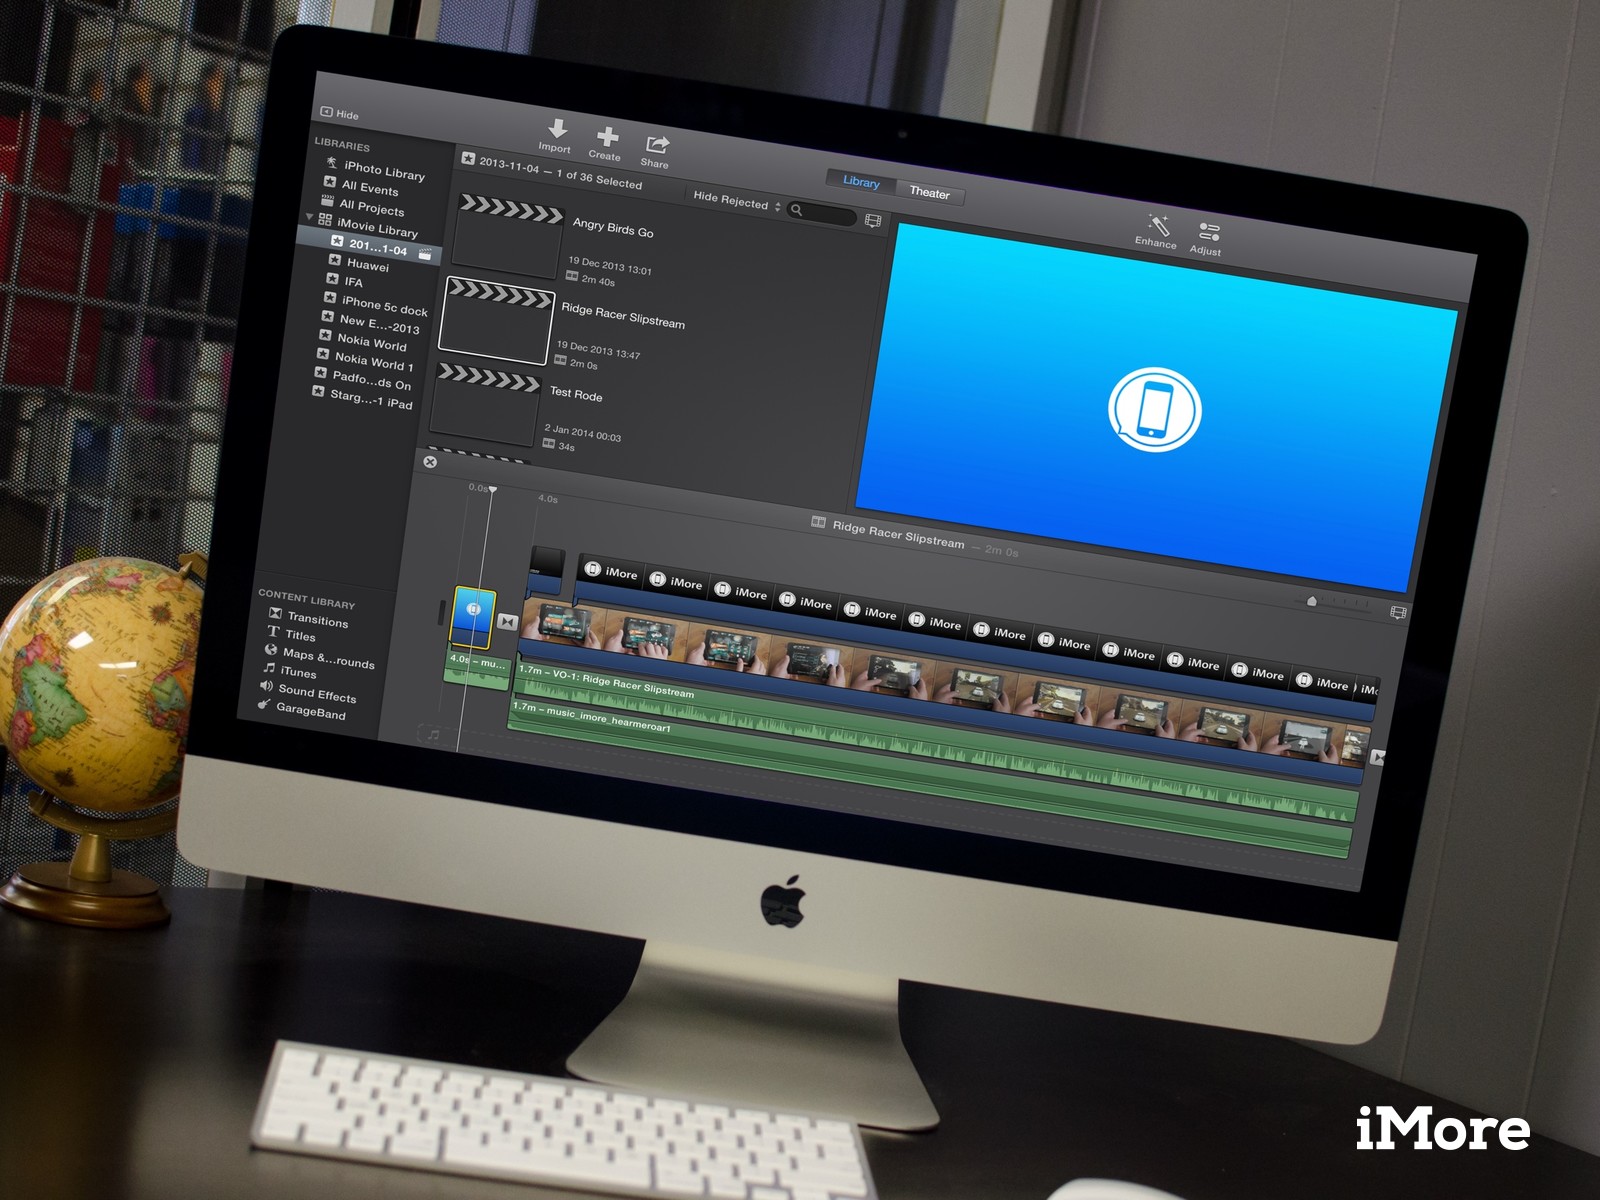 imovie 6.0.1 free download for mac